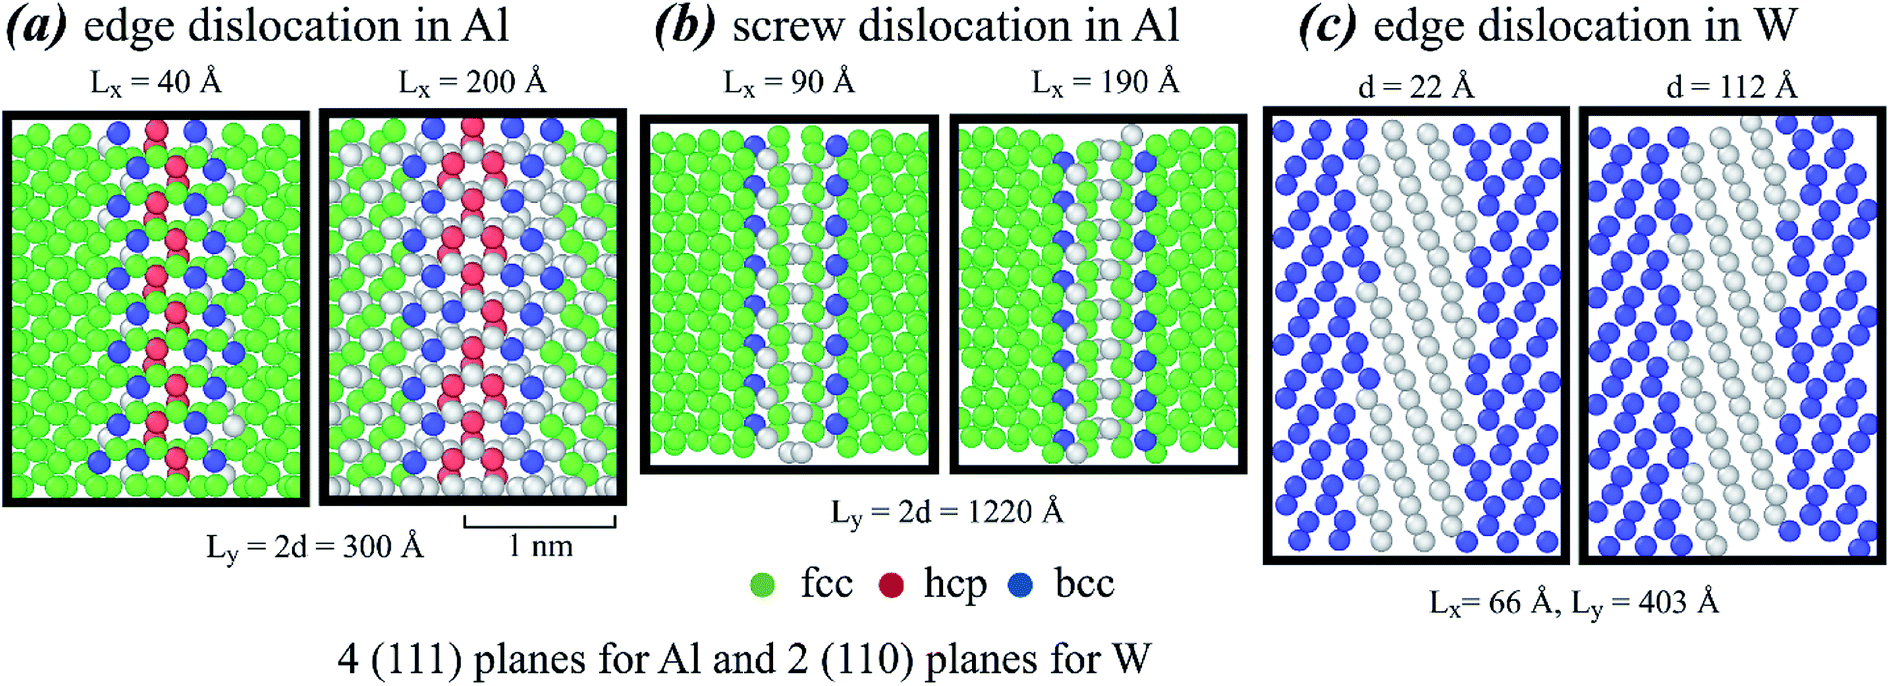 Thermodynamic Analysis Of Dissociation Of Periodic Dislocation Dipoles In Isotropic Crystals Rsc Advances Rsc Publishing